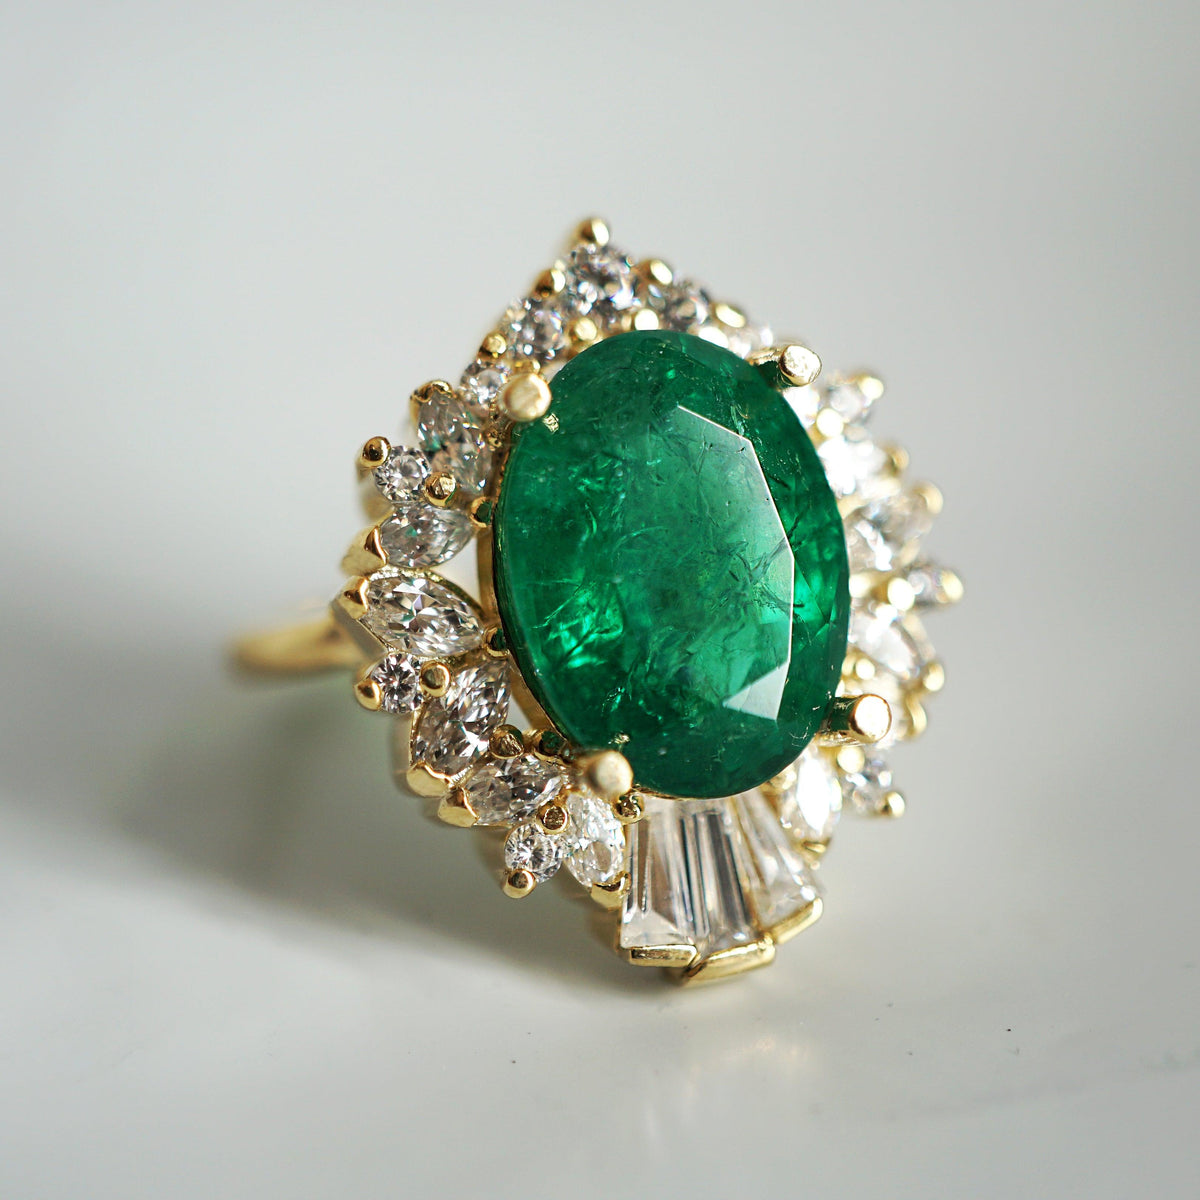 Hall Of Mirrors Oval Emerald Diamond Ring in 14K and 18K Gold, 3.9ct - Tippy Taste Jewelry